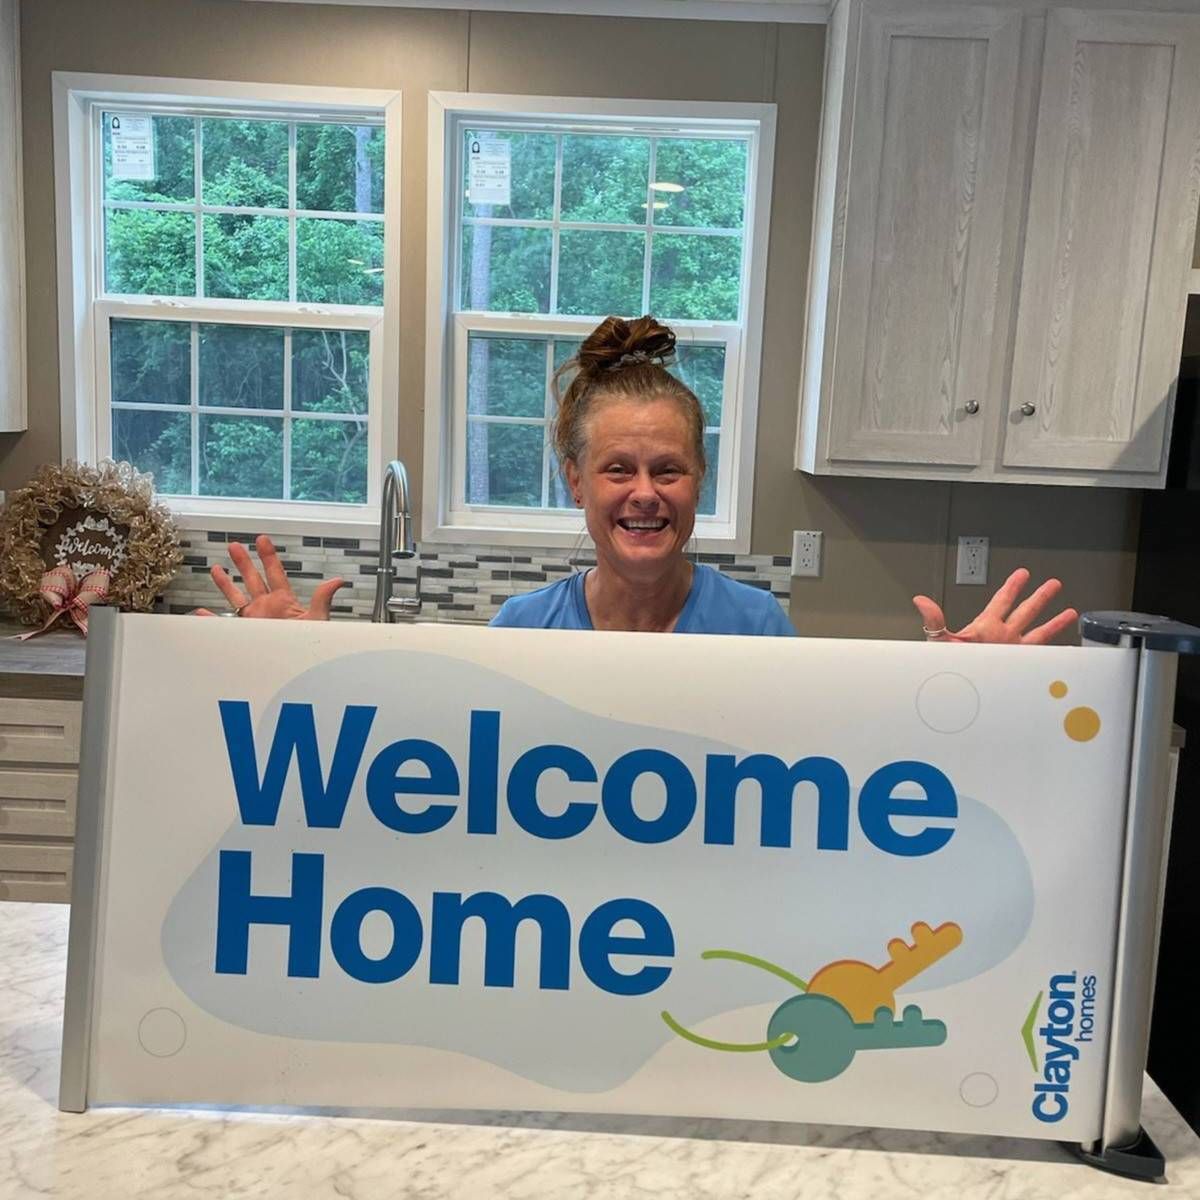 Alicia B. welcome home image